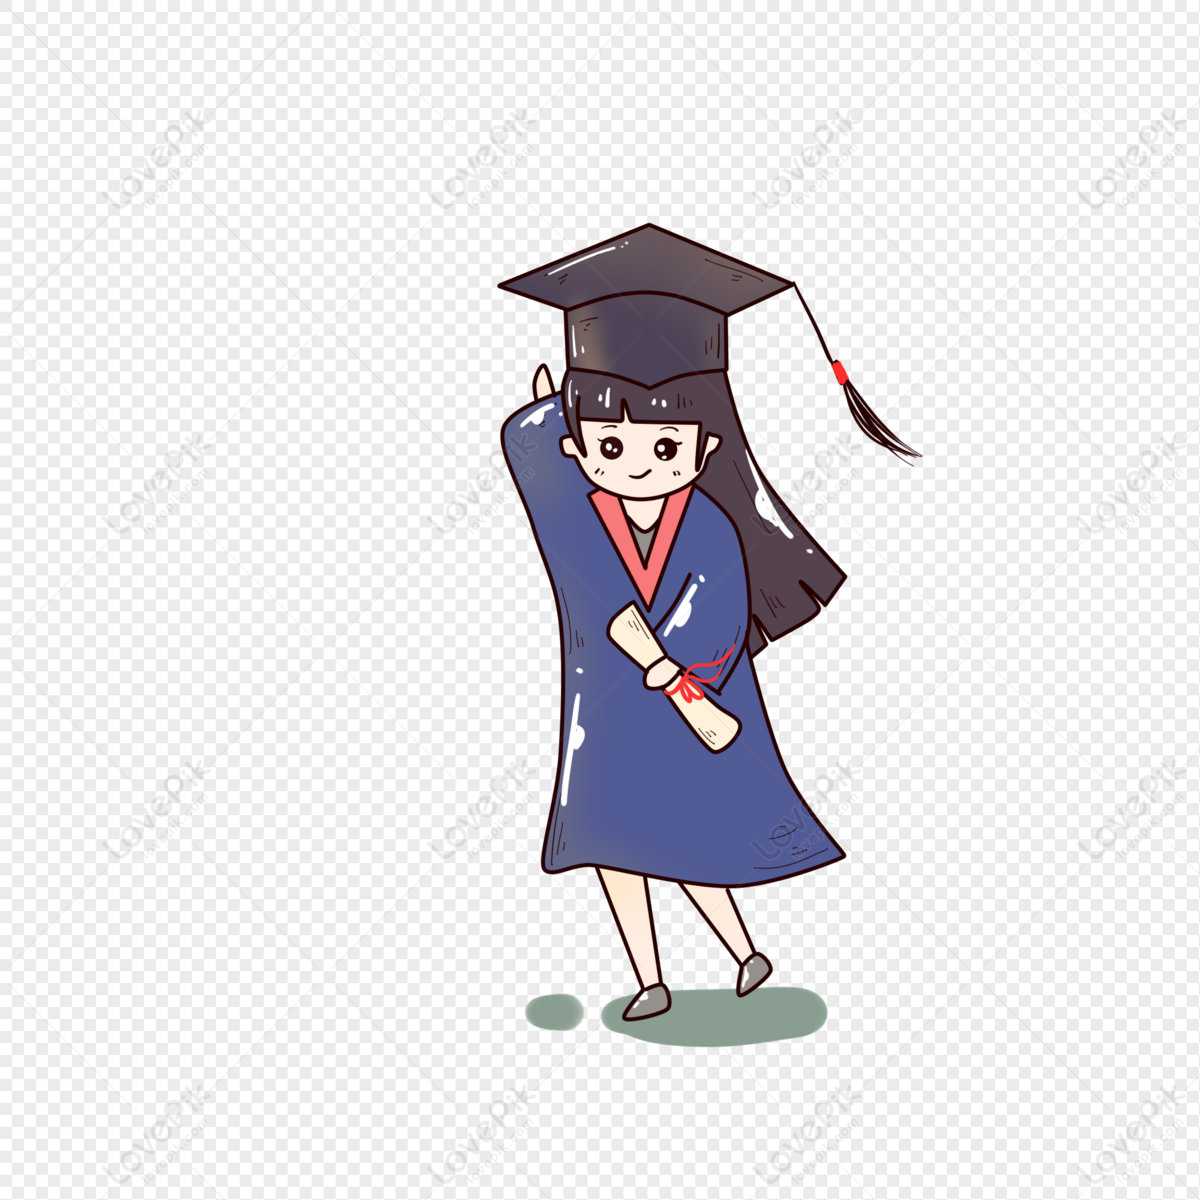 Graduation Cartoon Girl PNG White Transparent And Clipart Image For Free  Download - Lovepik | 401217502